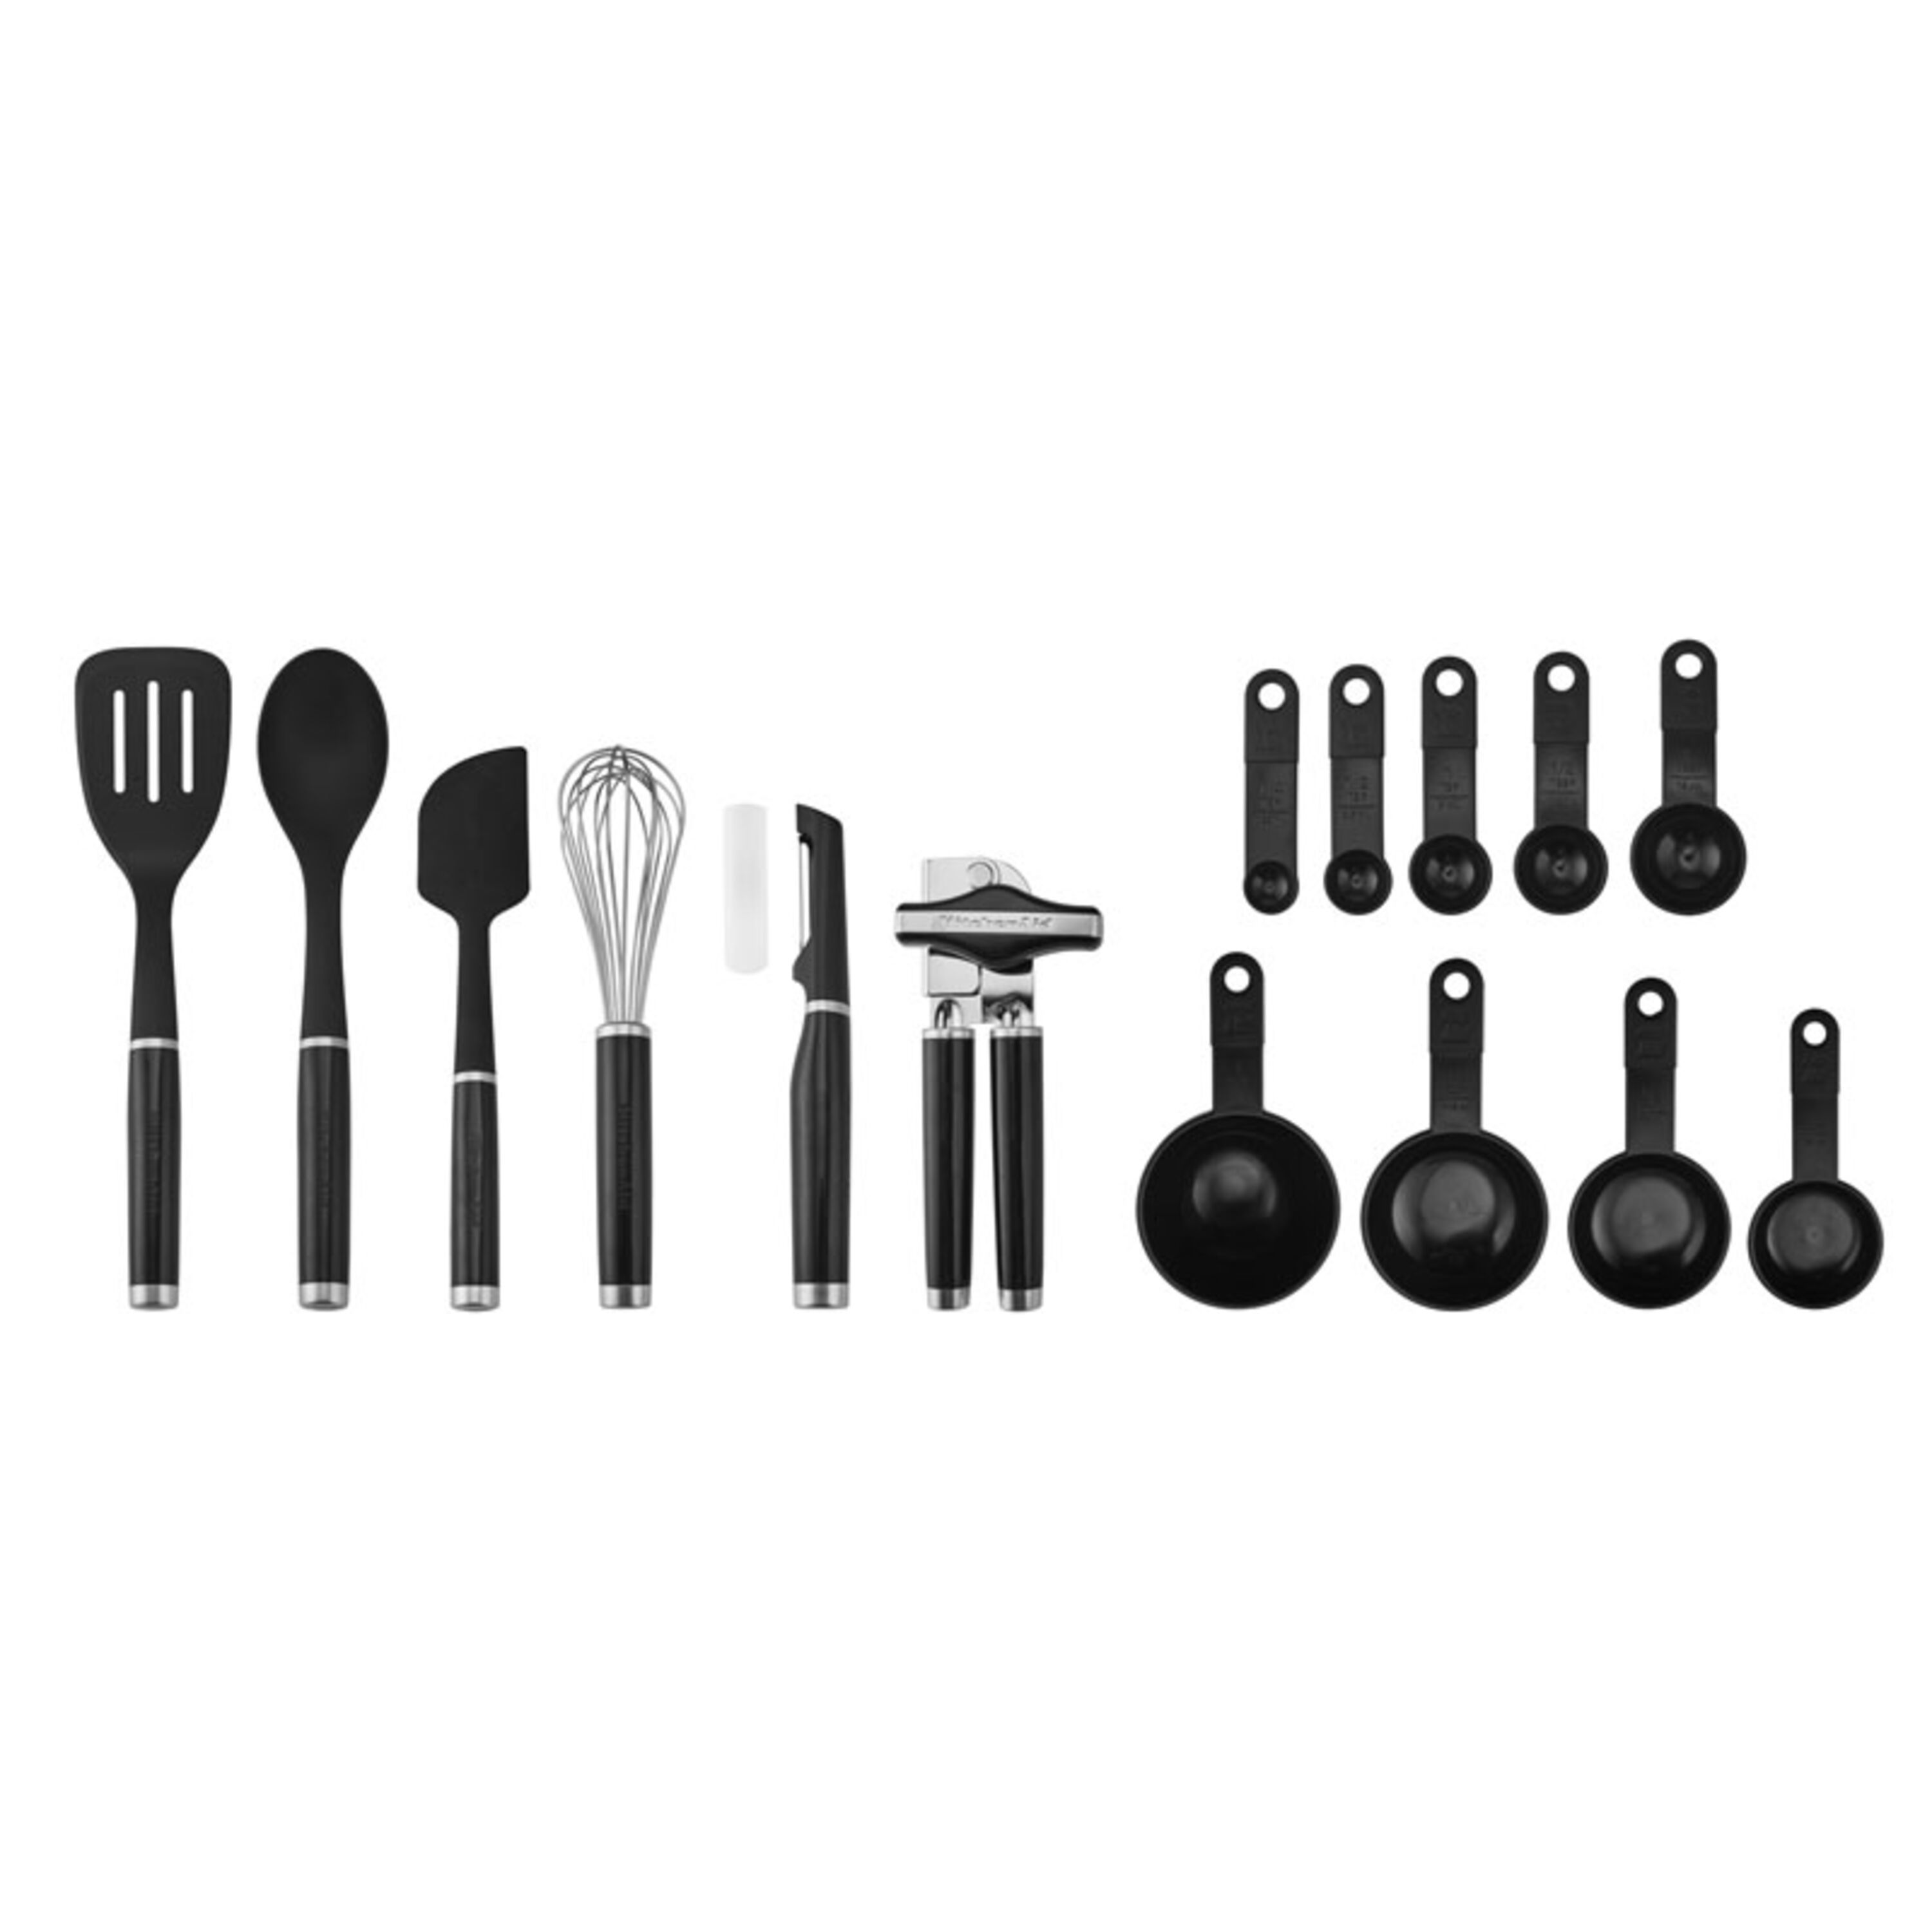 Kitchenaid 15-Piece Tool and Gadget Set in Black - image 1 of 18